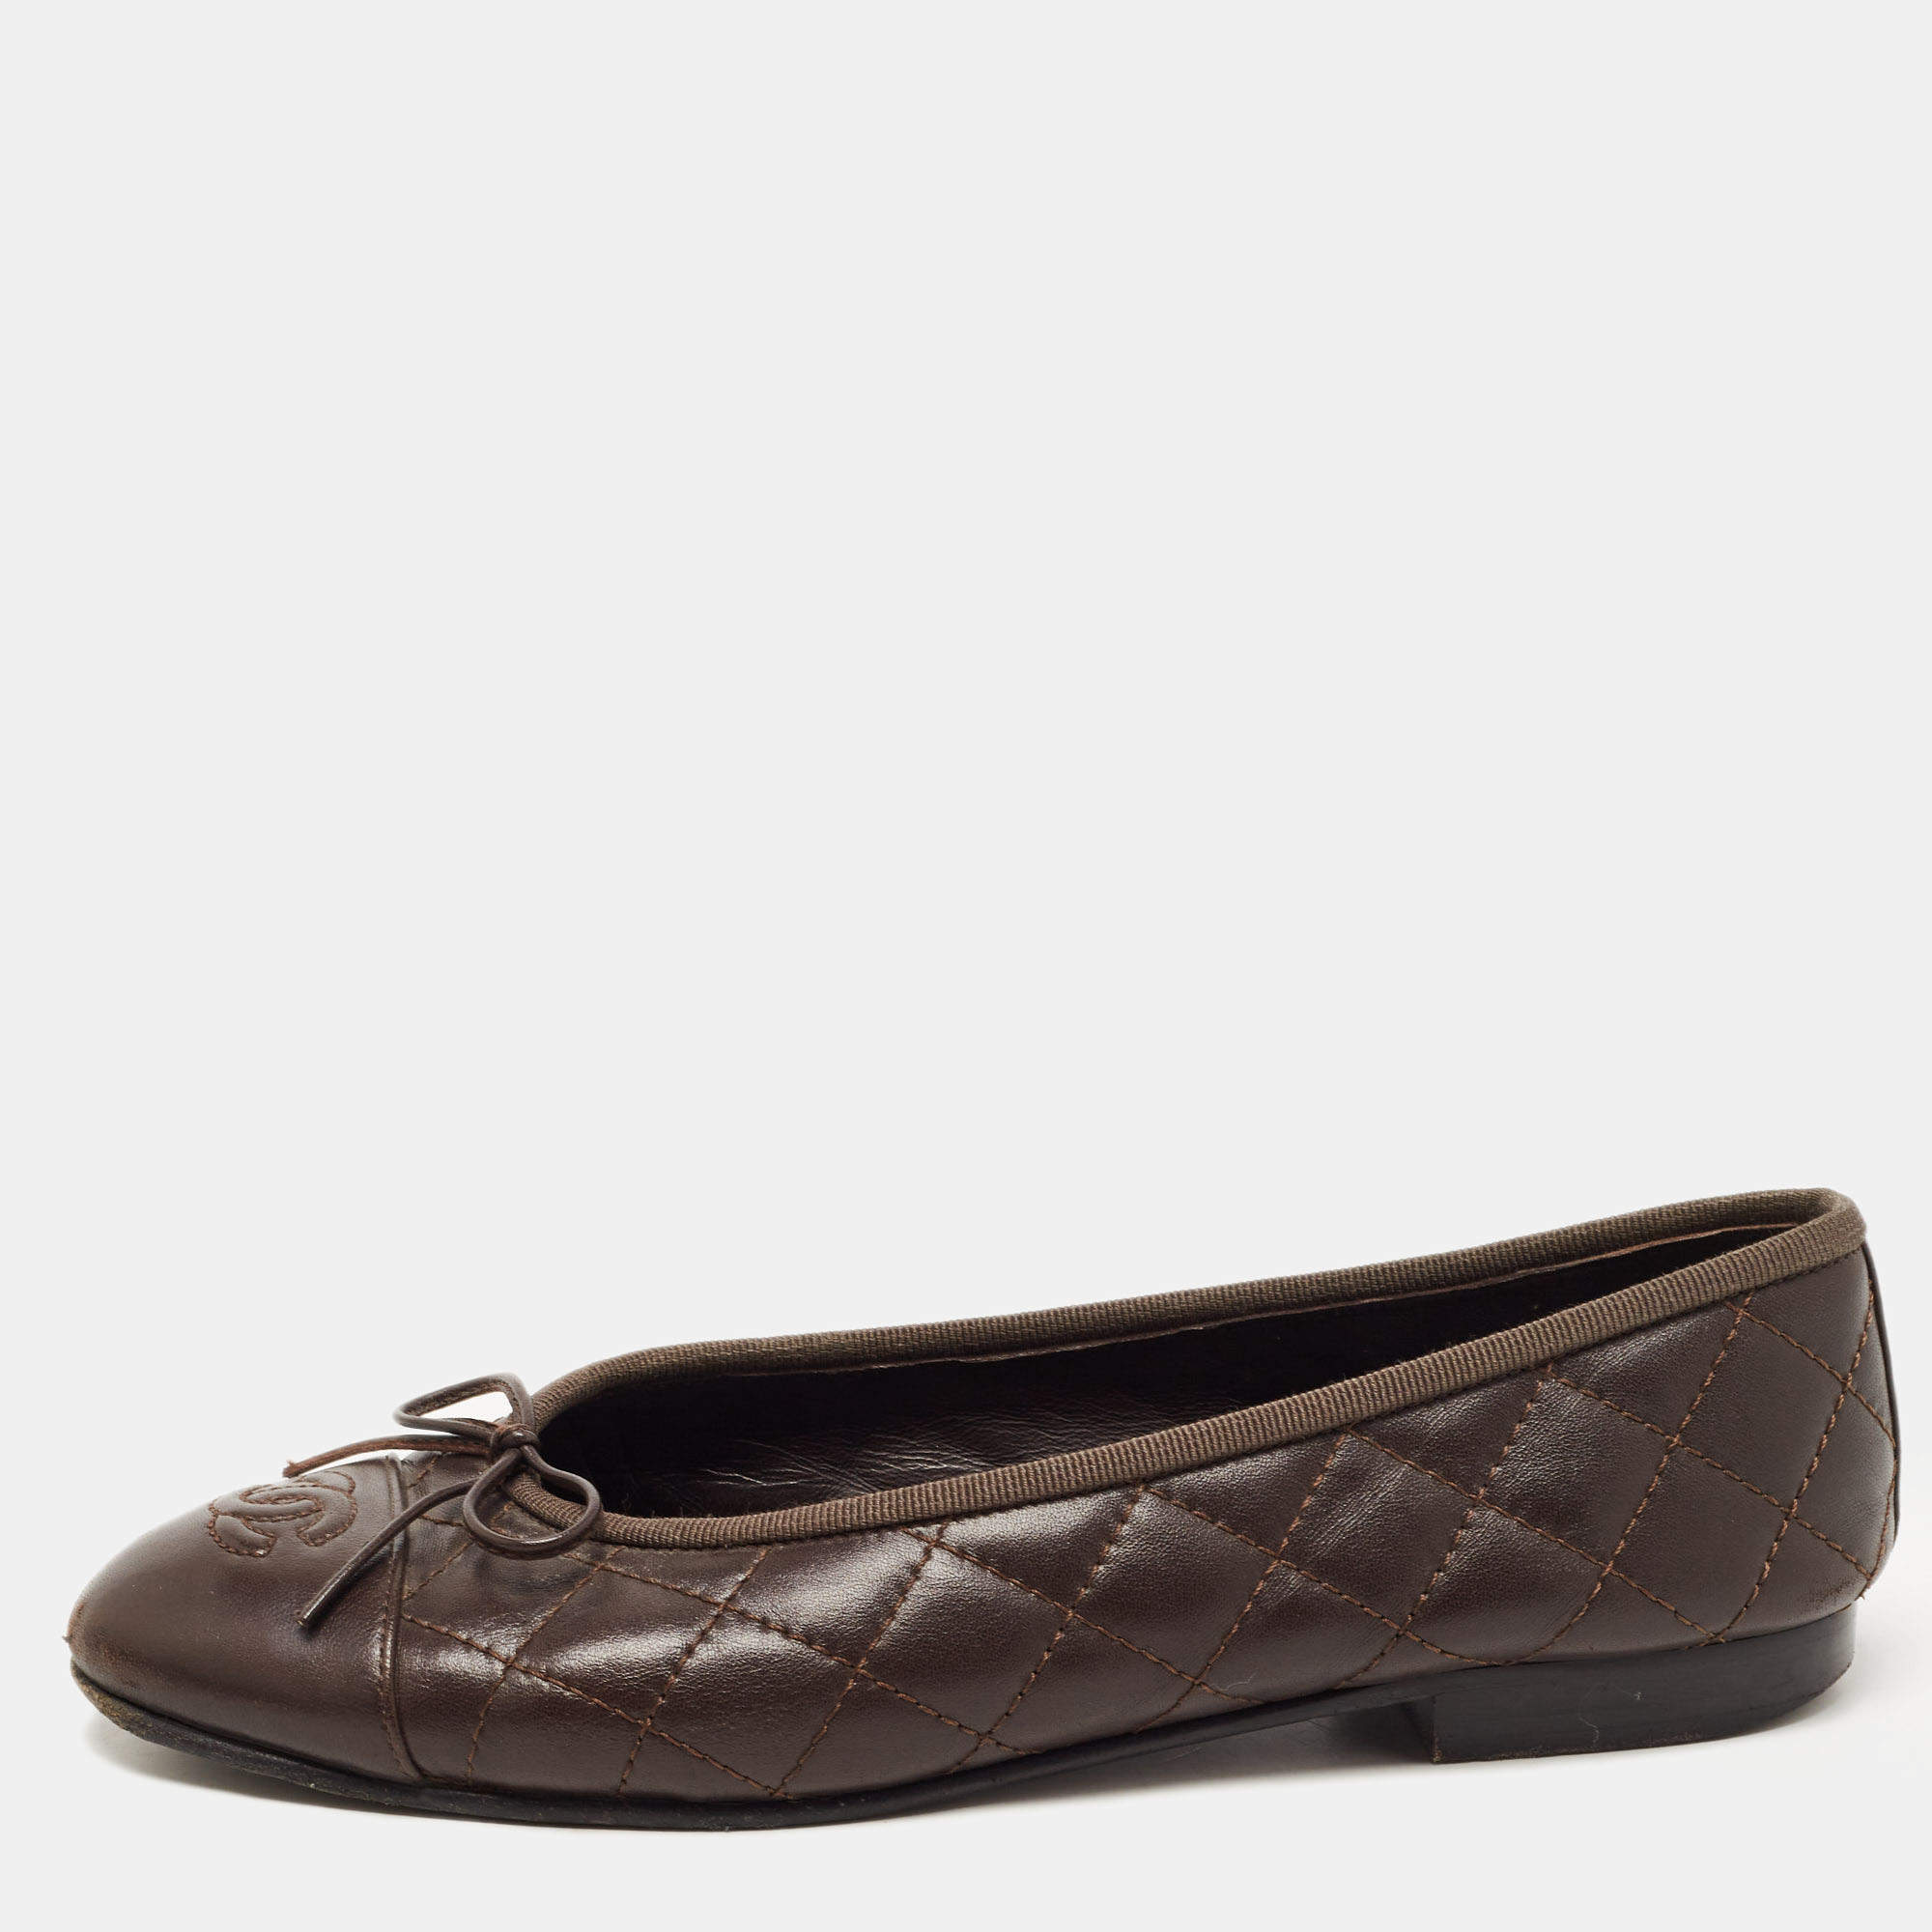 Chanel Dark Brown Chanel Flats TLC Ballet | CC 37.5 Bow Quilted Size Leather